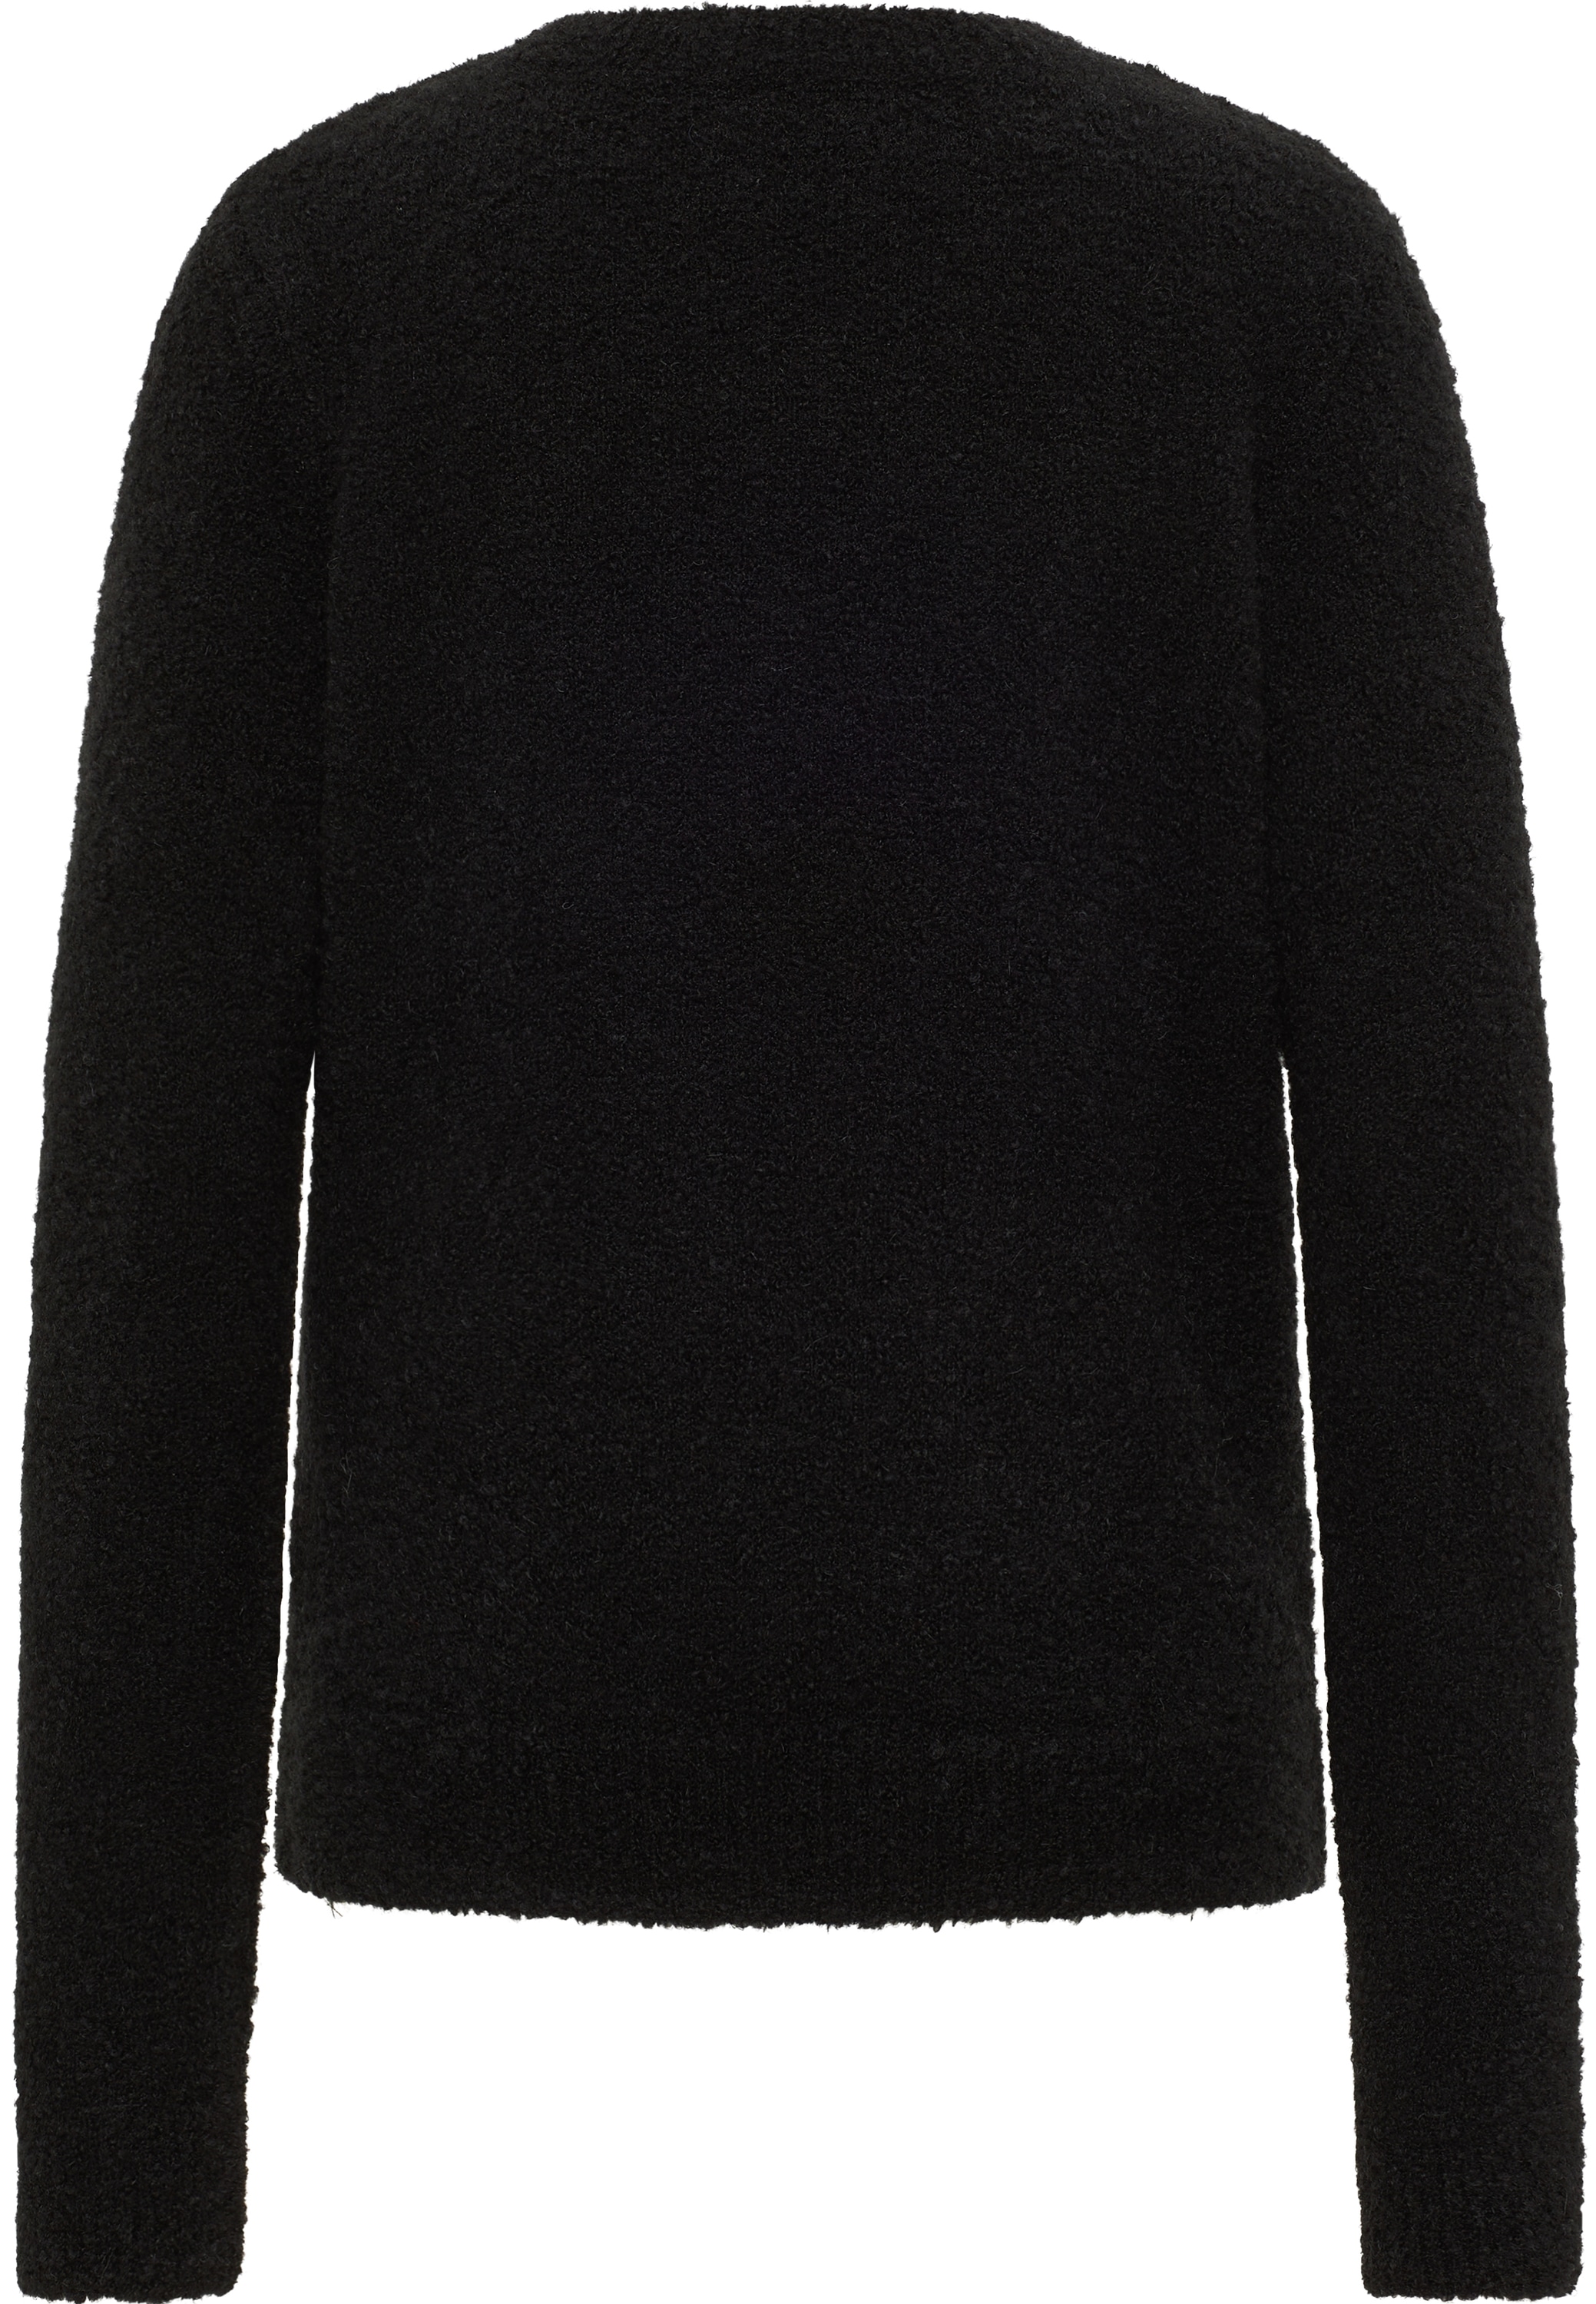 OTTO Shop »Mustang Online MUSTANG Sweater Sweater im Strickpullover«